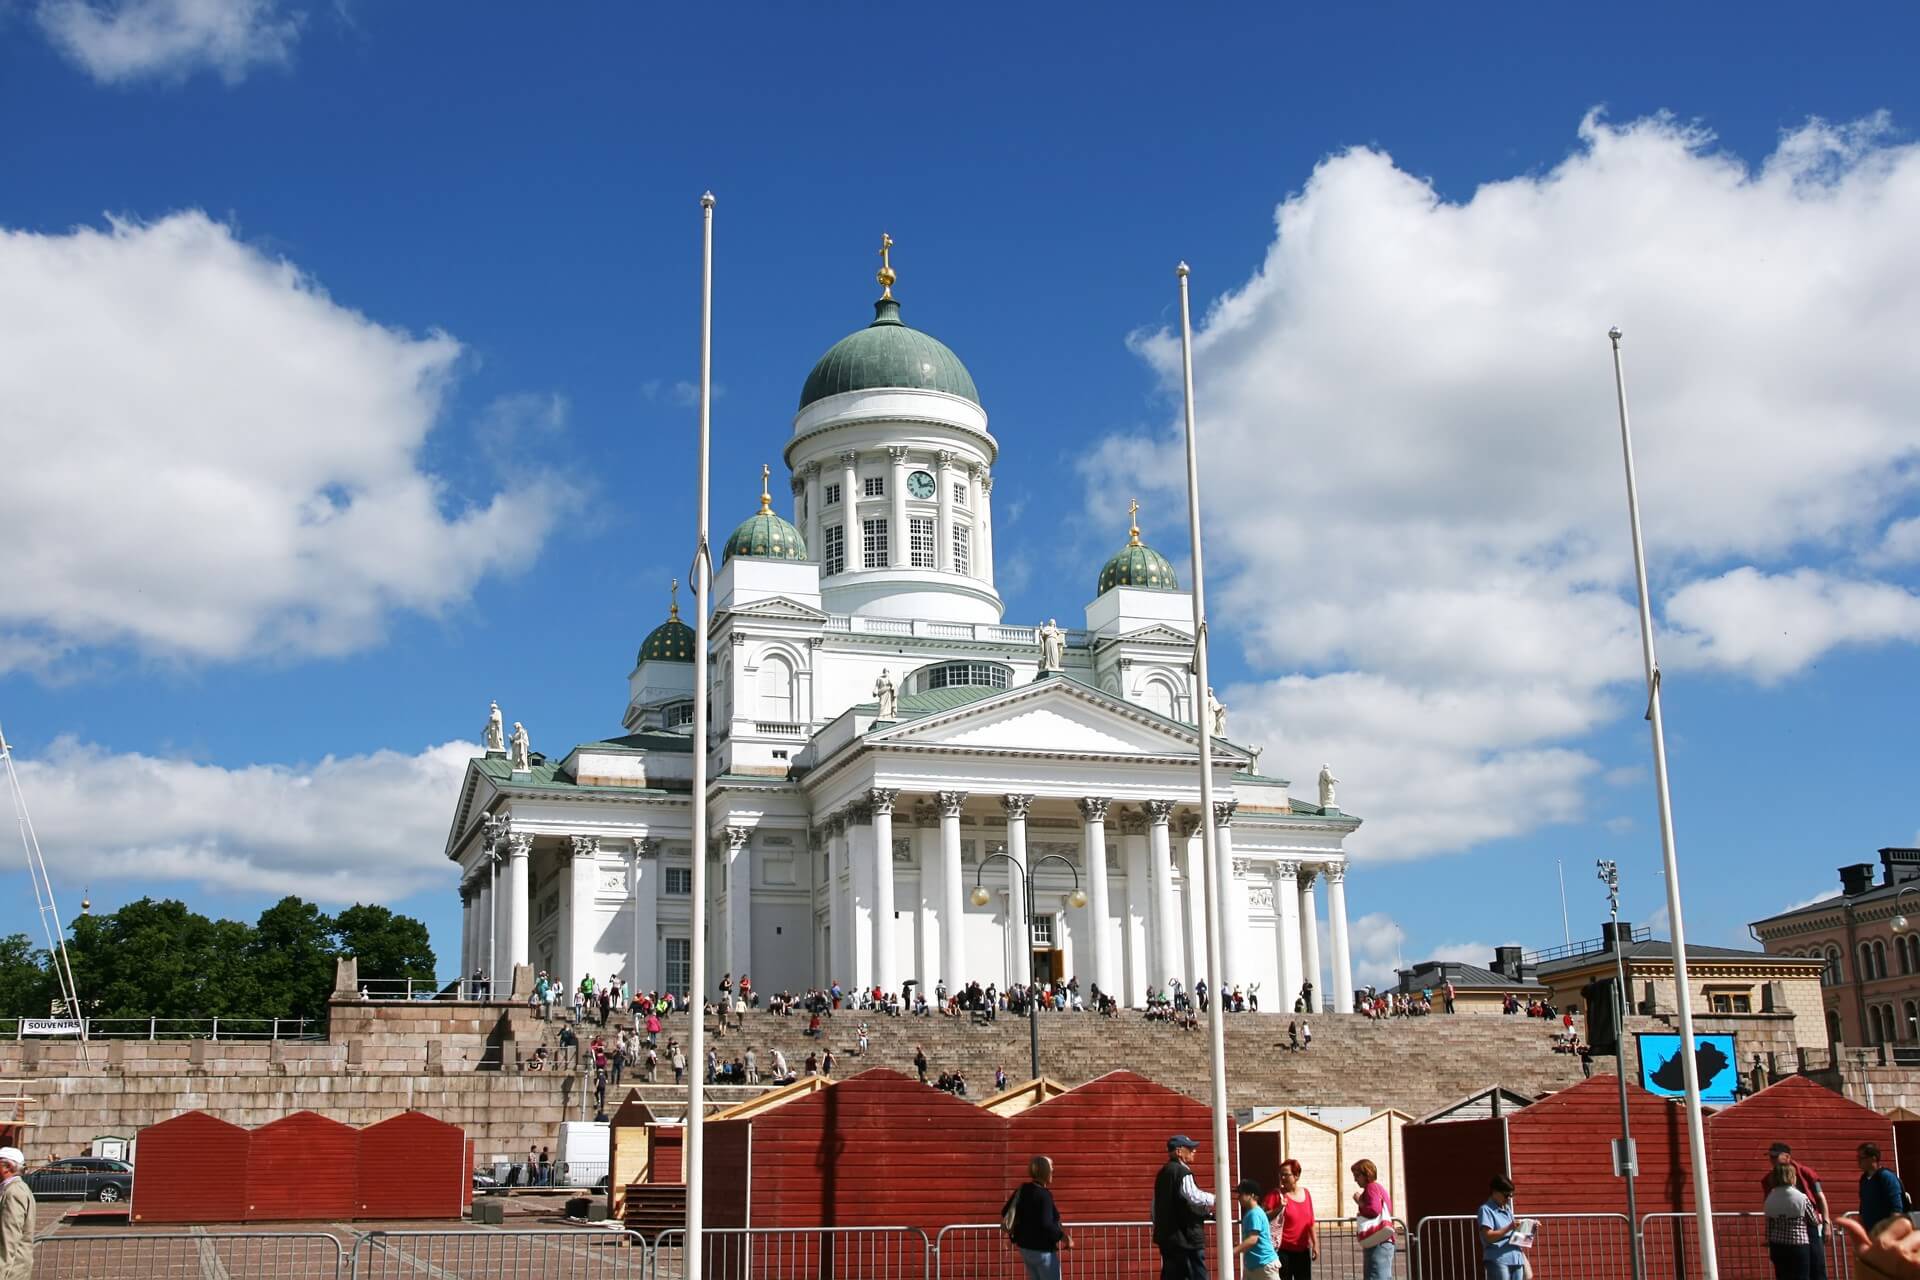 Helsinki Cathedral, built in the 19th century. A famous sightseeing spot in Helsinkli.